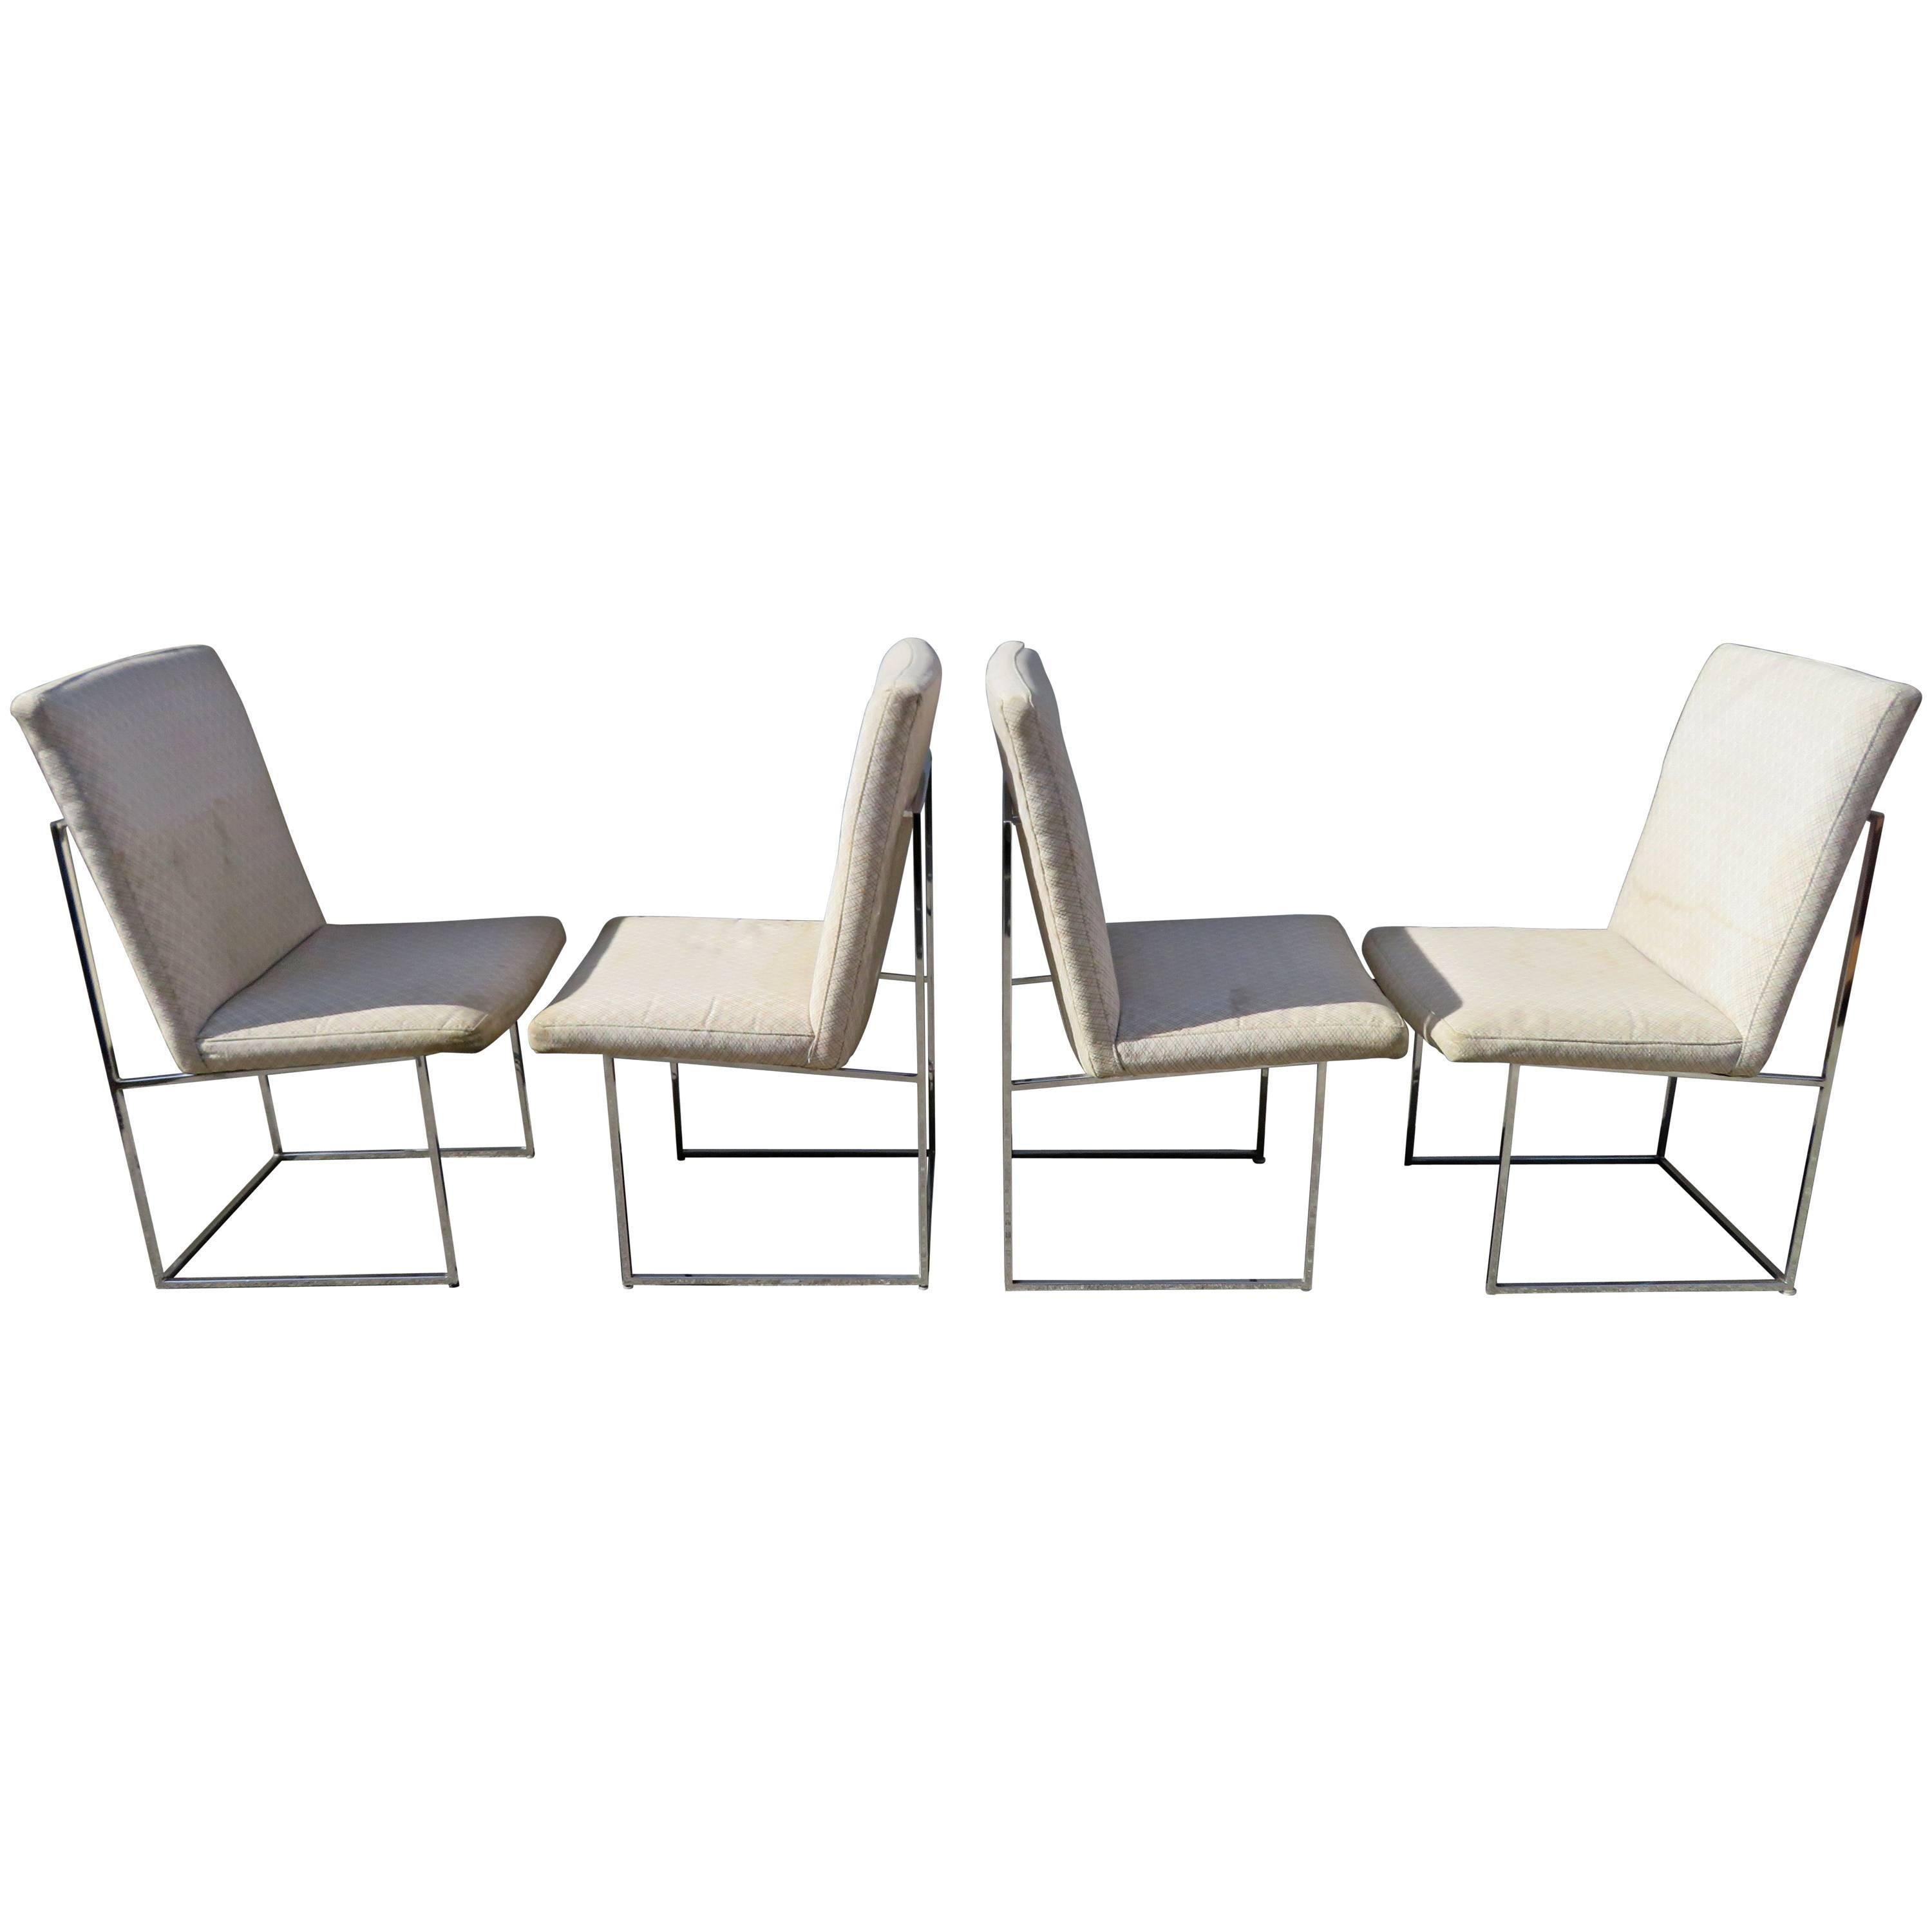 Set of Four Milo Baughman Chrome Cube Architectural Dining Chairs, Midcentury For Sale